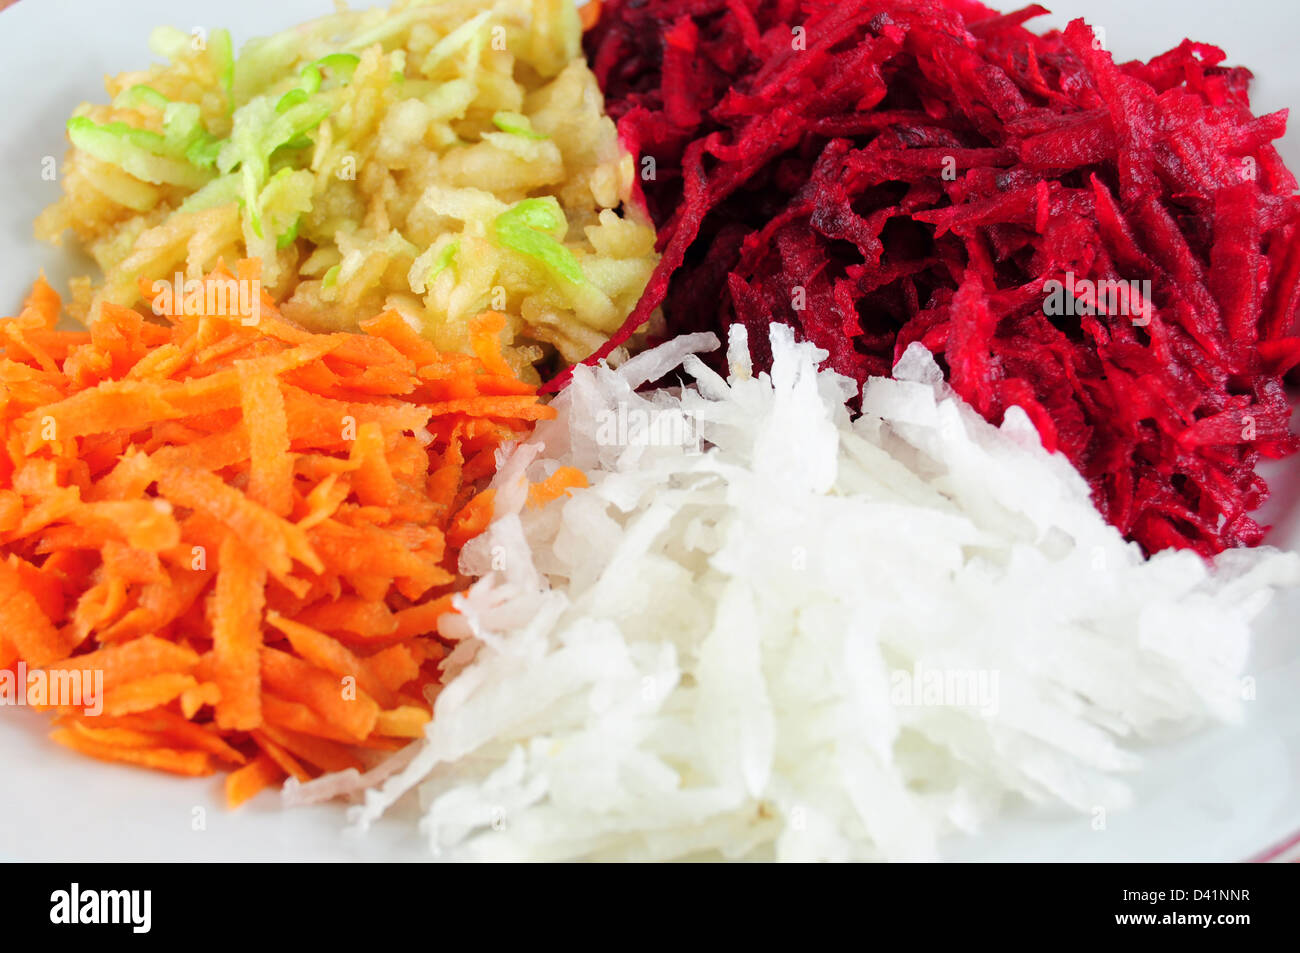 Salad from shredded beetroot, turnip, carrots and apple - closeup view Stock Photo